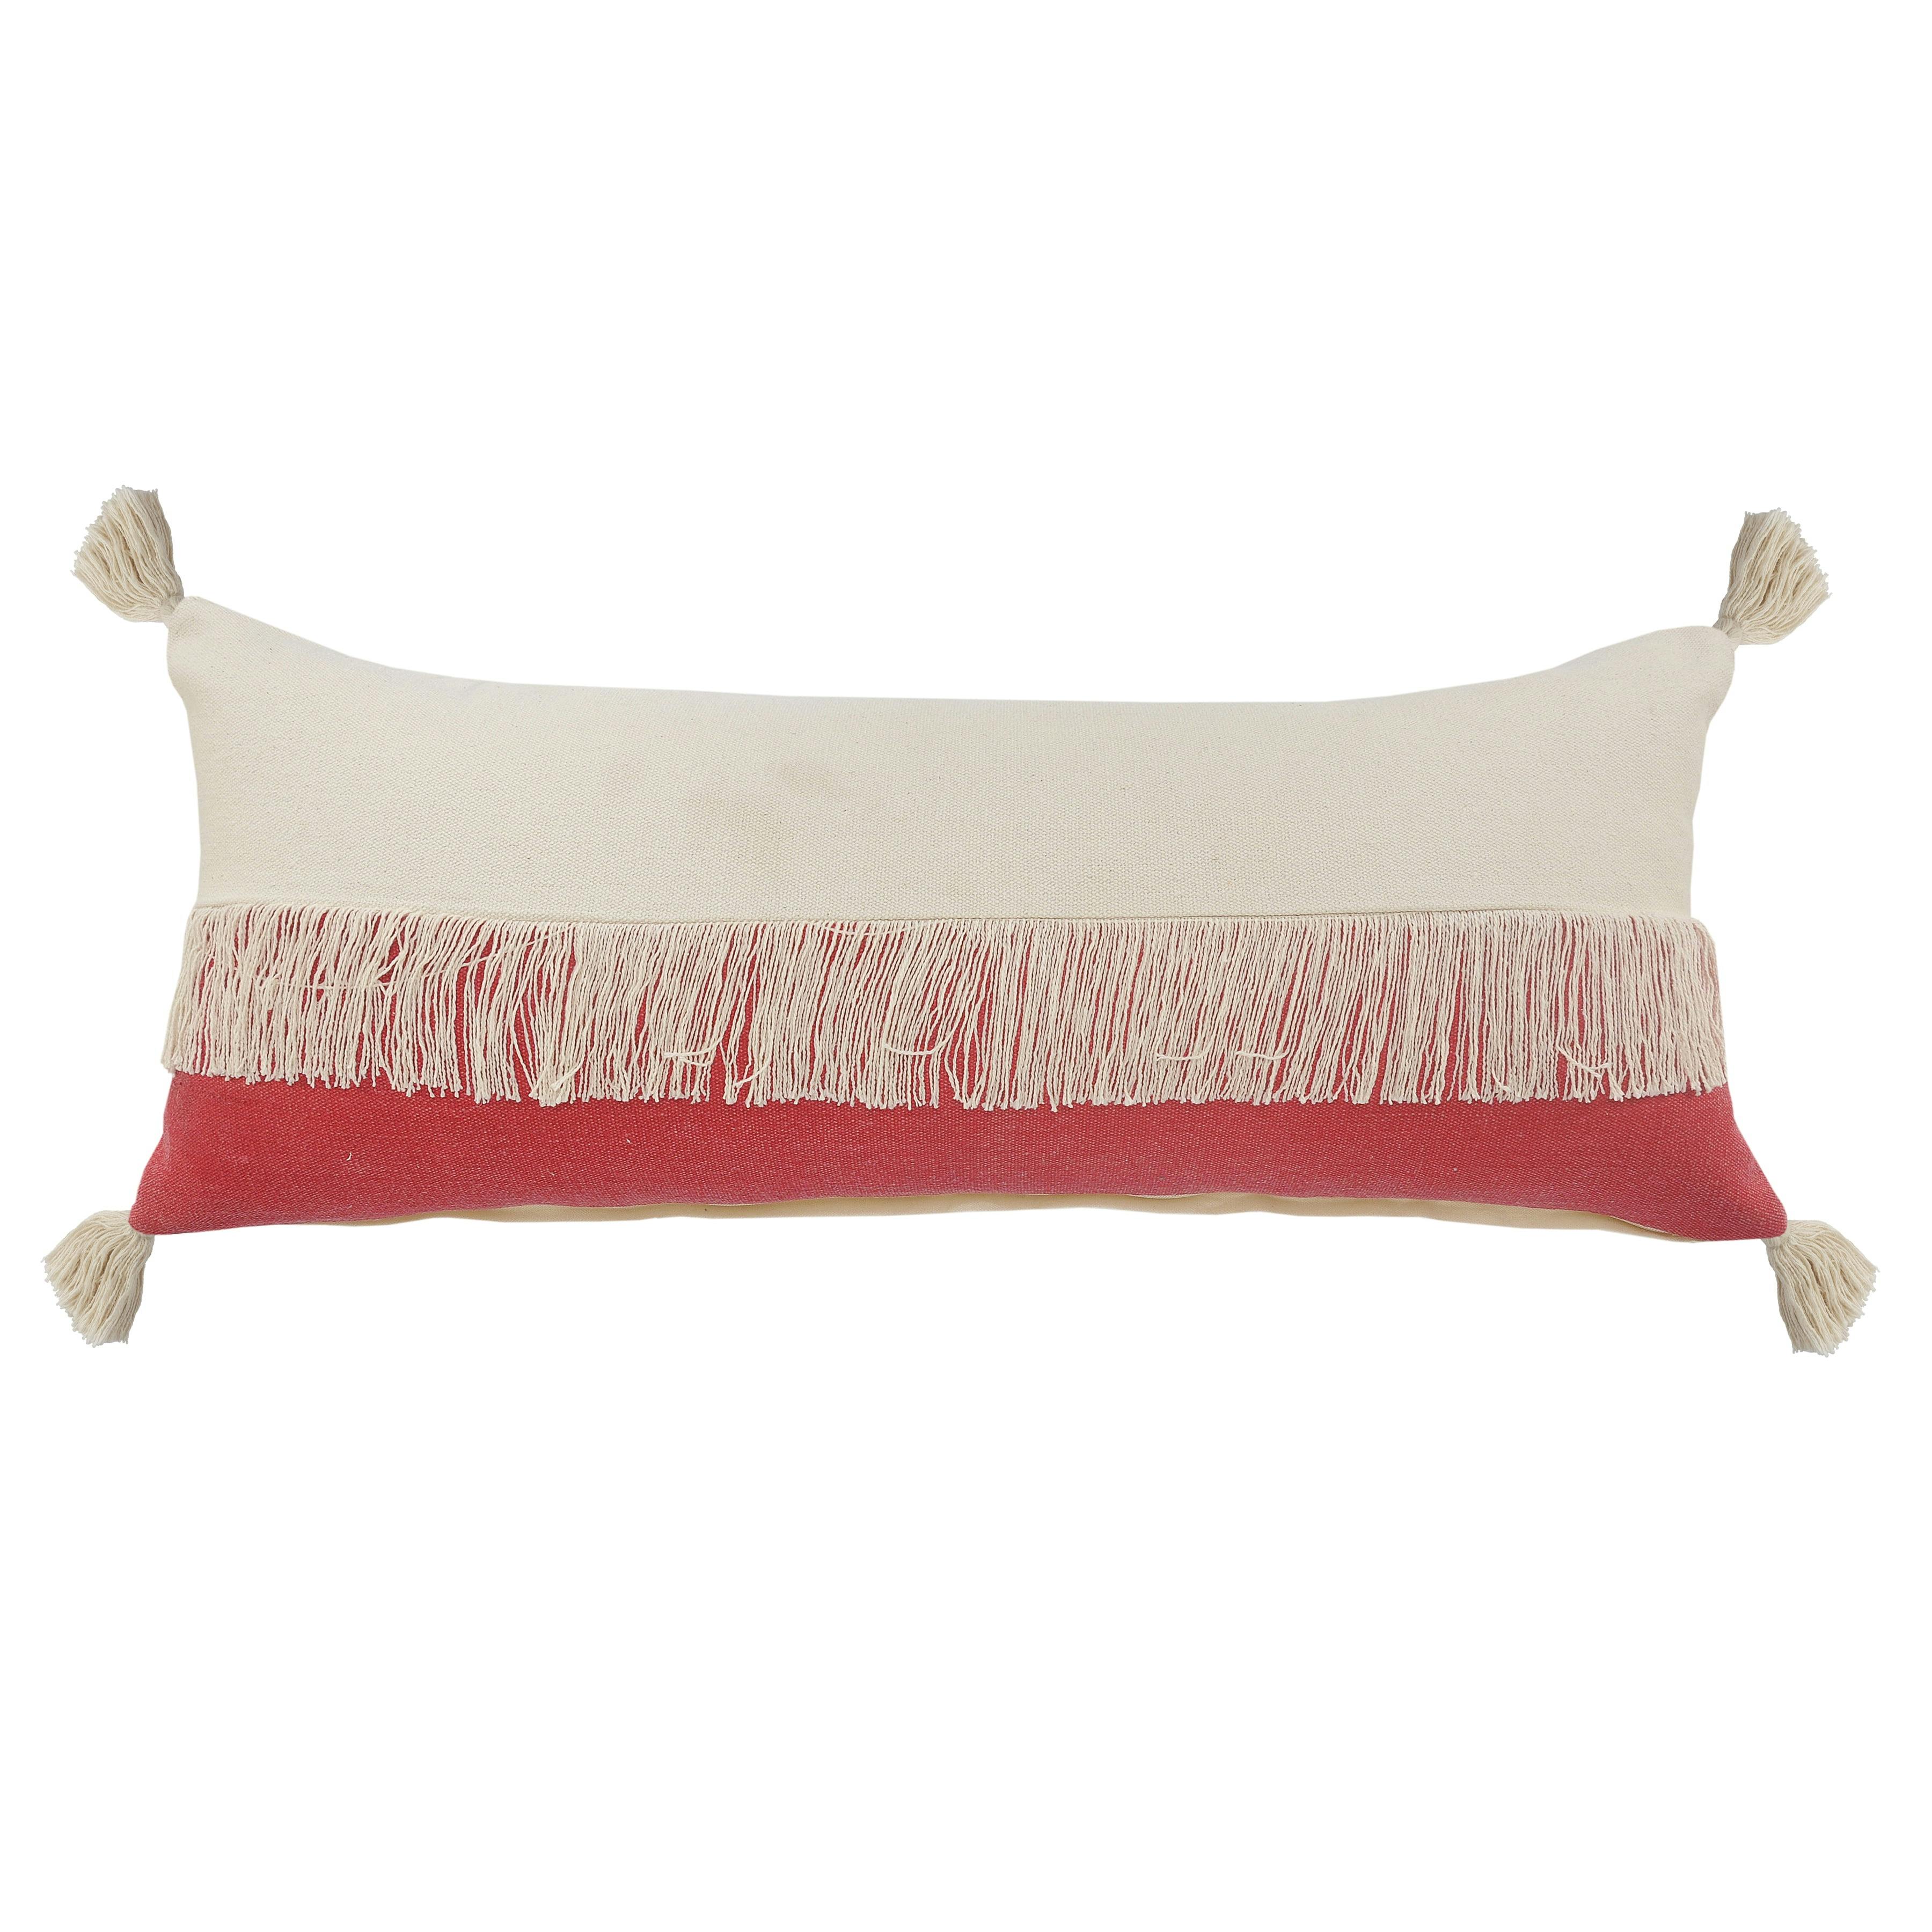 Raspberry Red and Off-White Cotton Lumbar Throw Pillow, 14" x 36"